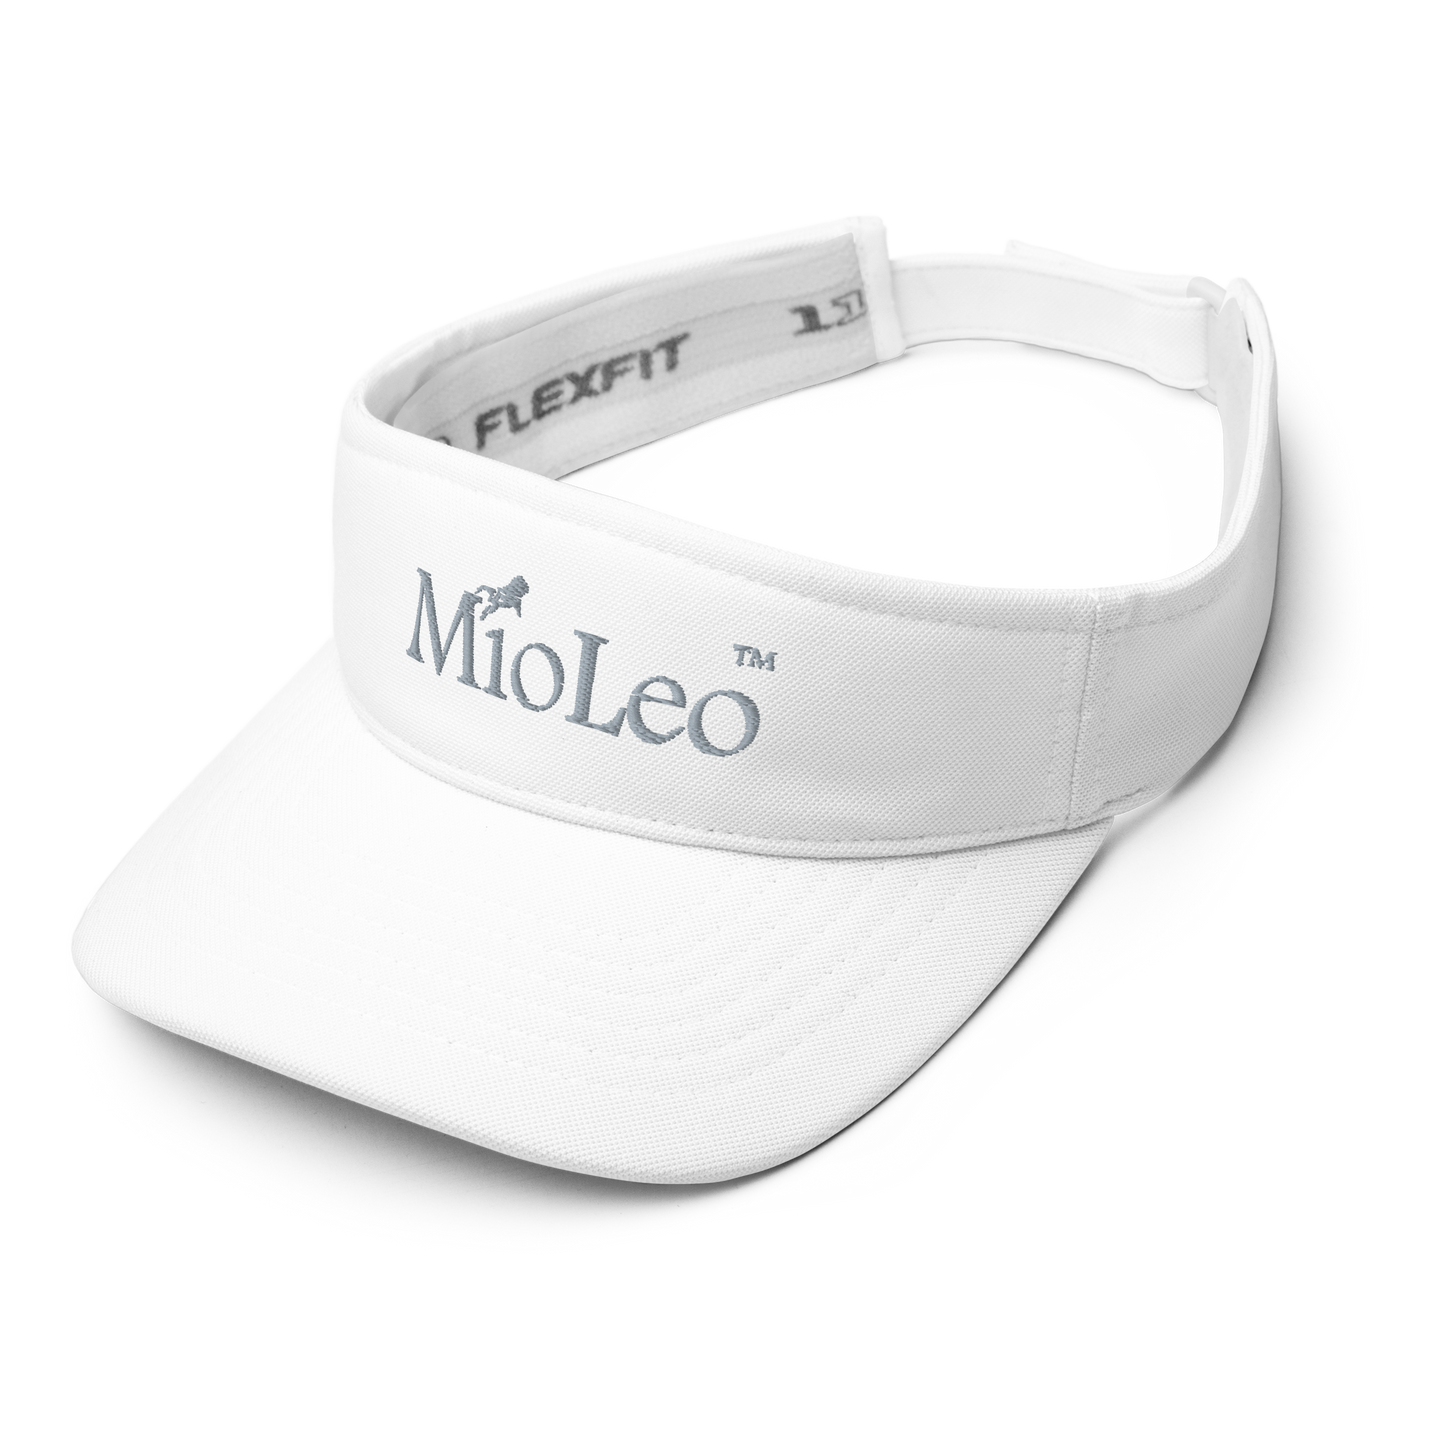 Visor White-Line No.553 "unlimited" by MioLeo